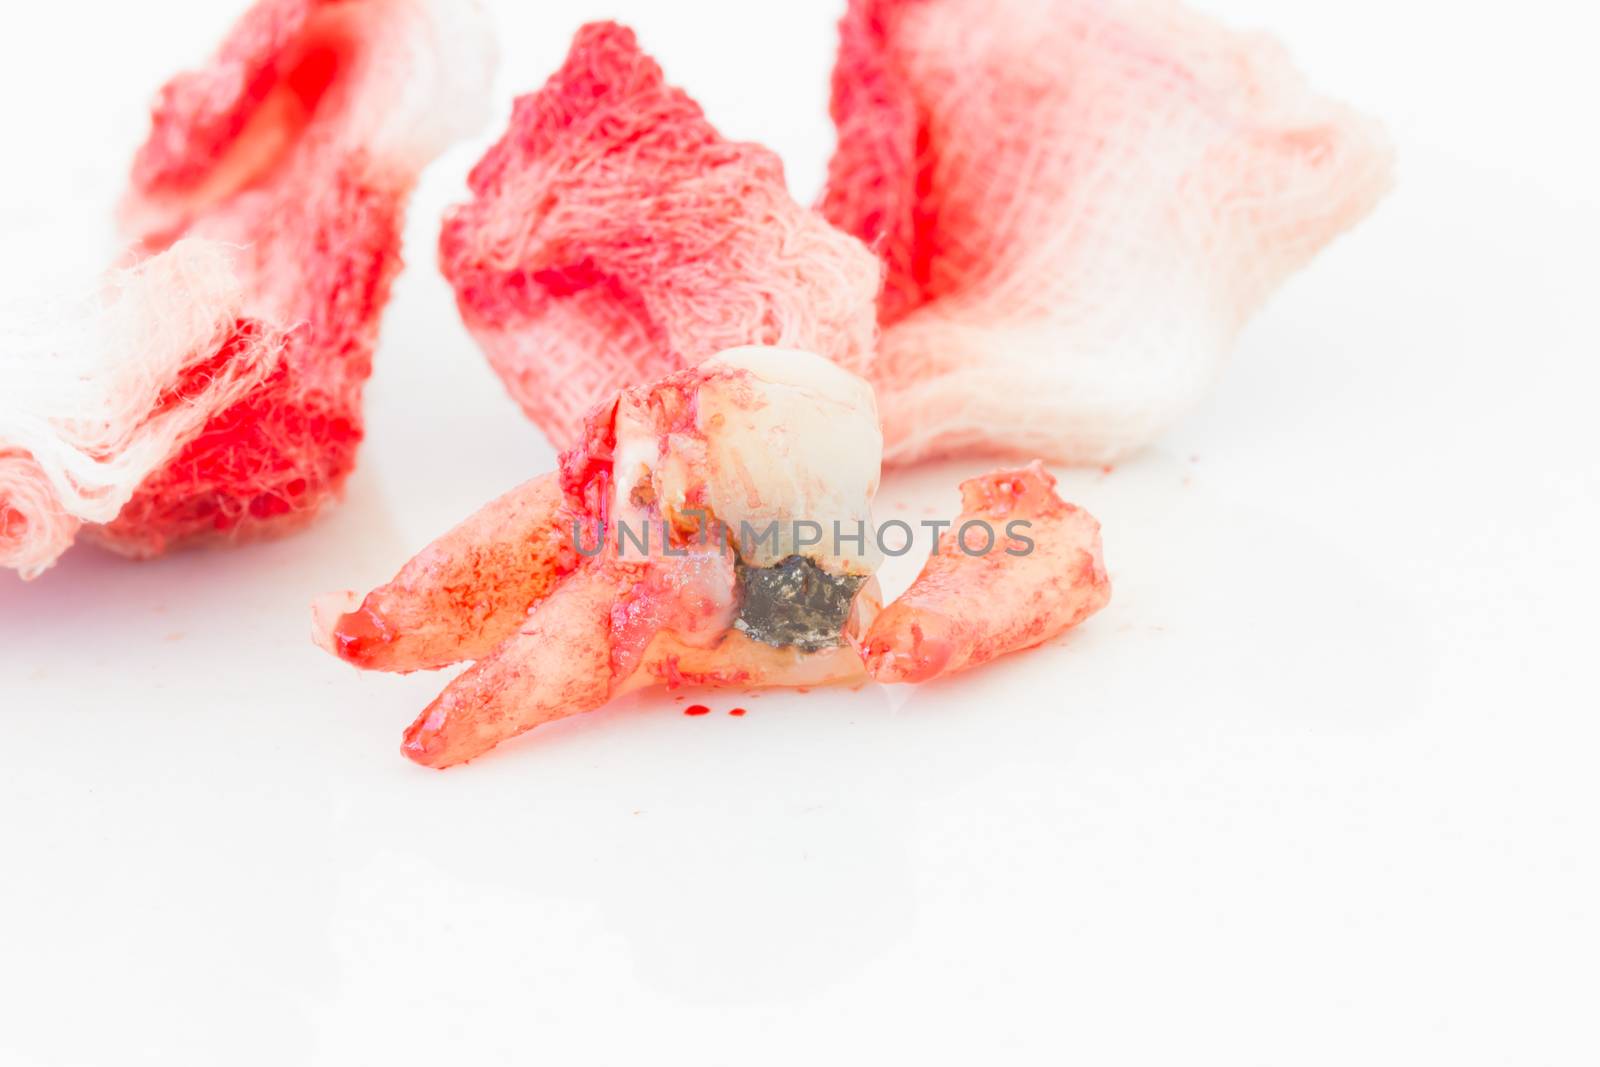 Extraction of decayed tooth with bloody gauze pad on white backg by tidarattj